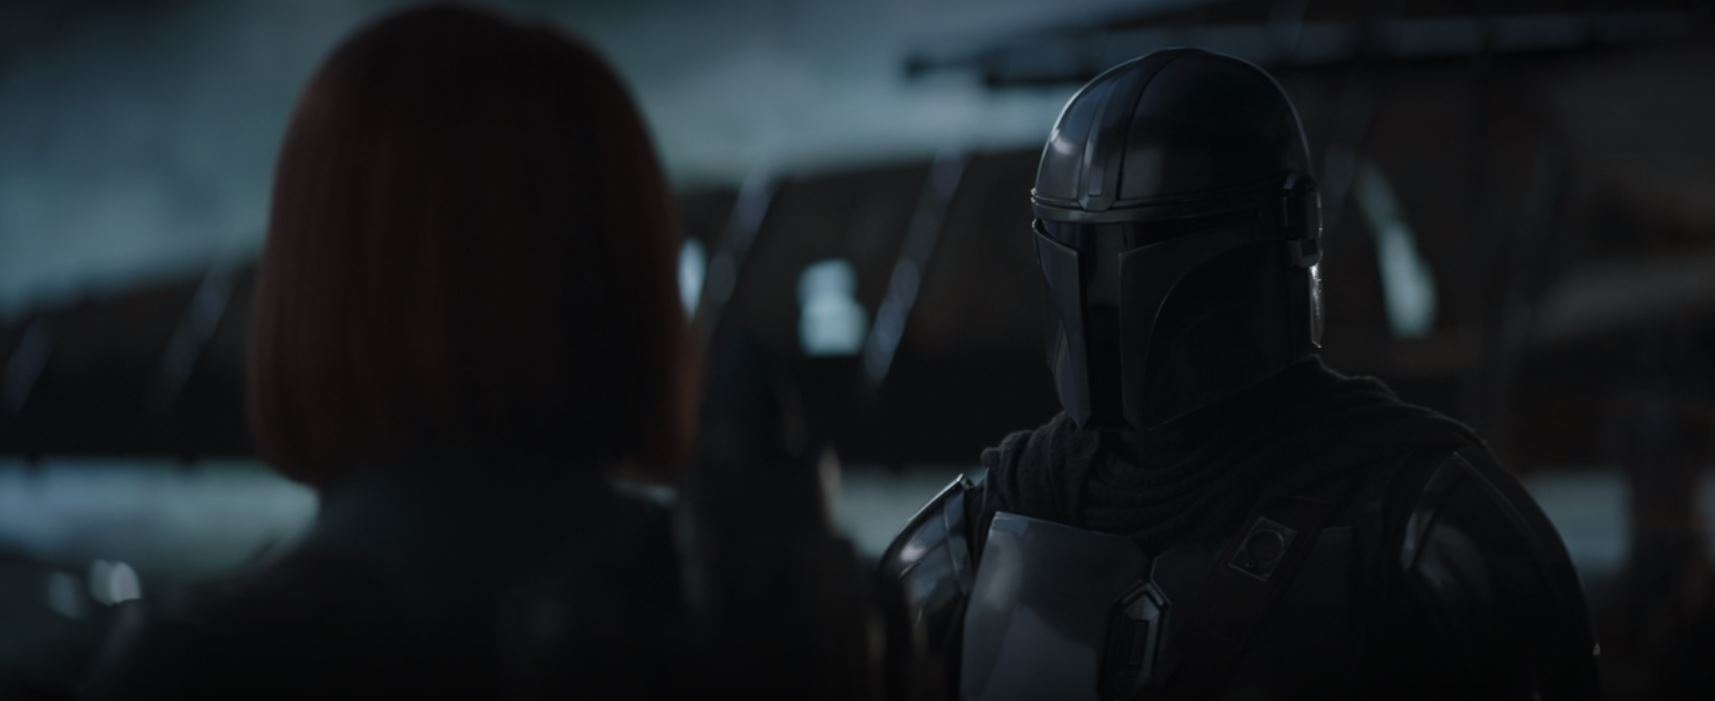 Pedro Pascal as Din Djarin in The Mandalorian 3x07. Courtesy of Lucasfilm and Disney Plus.